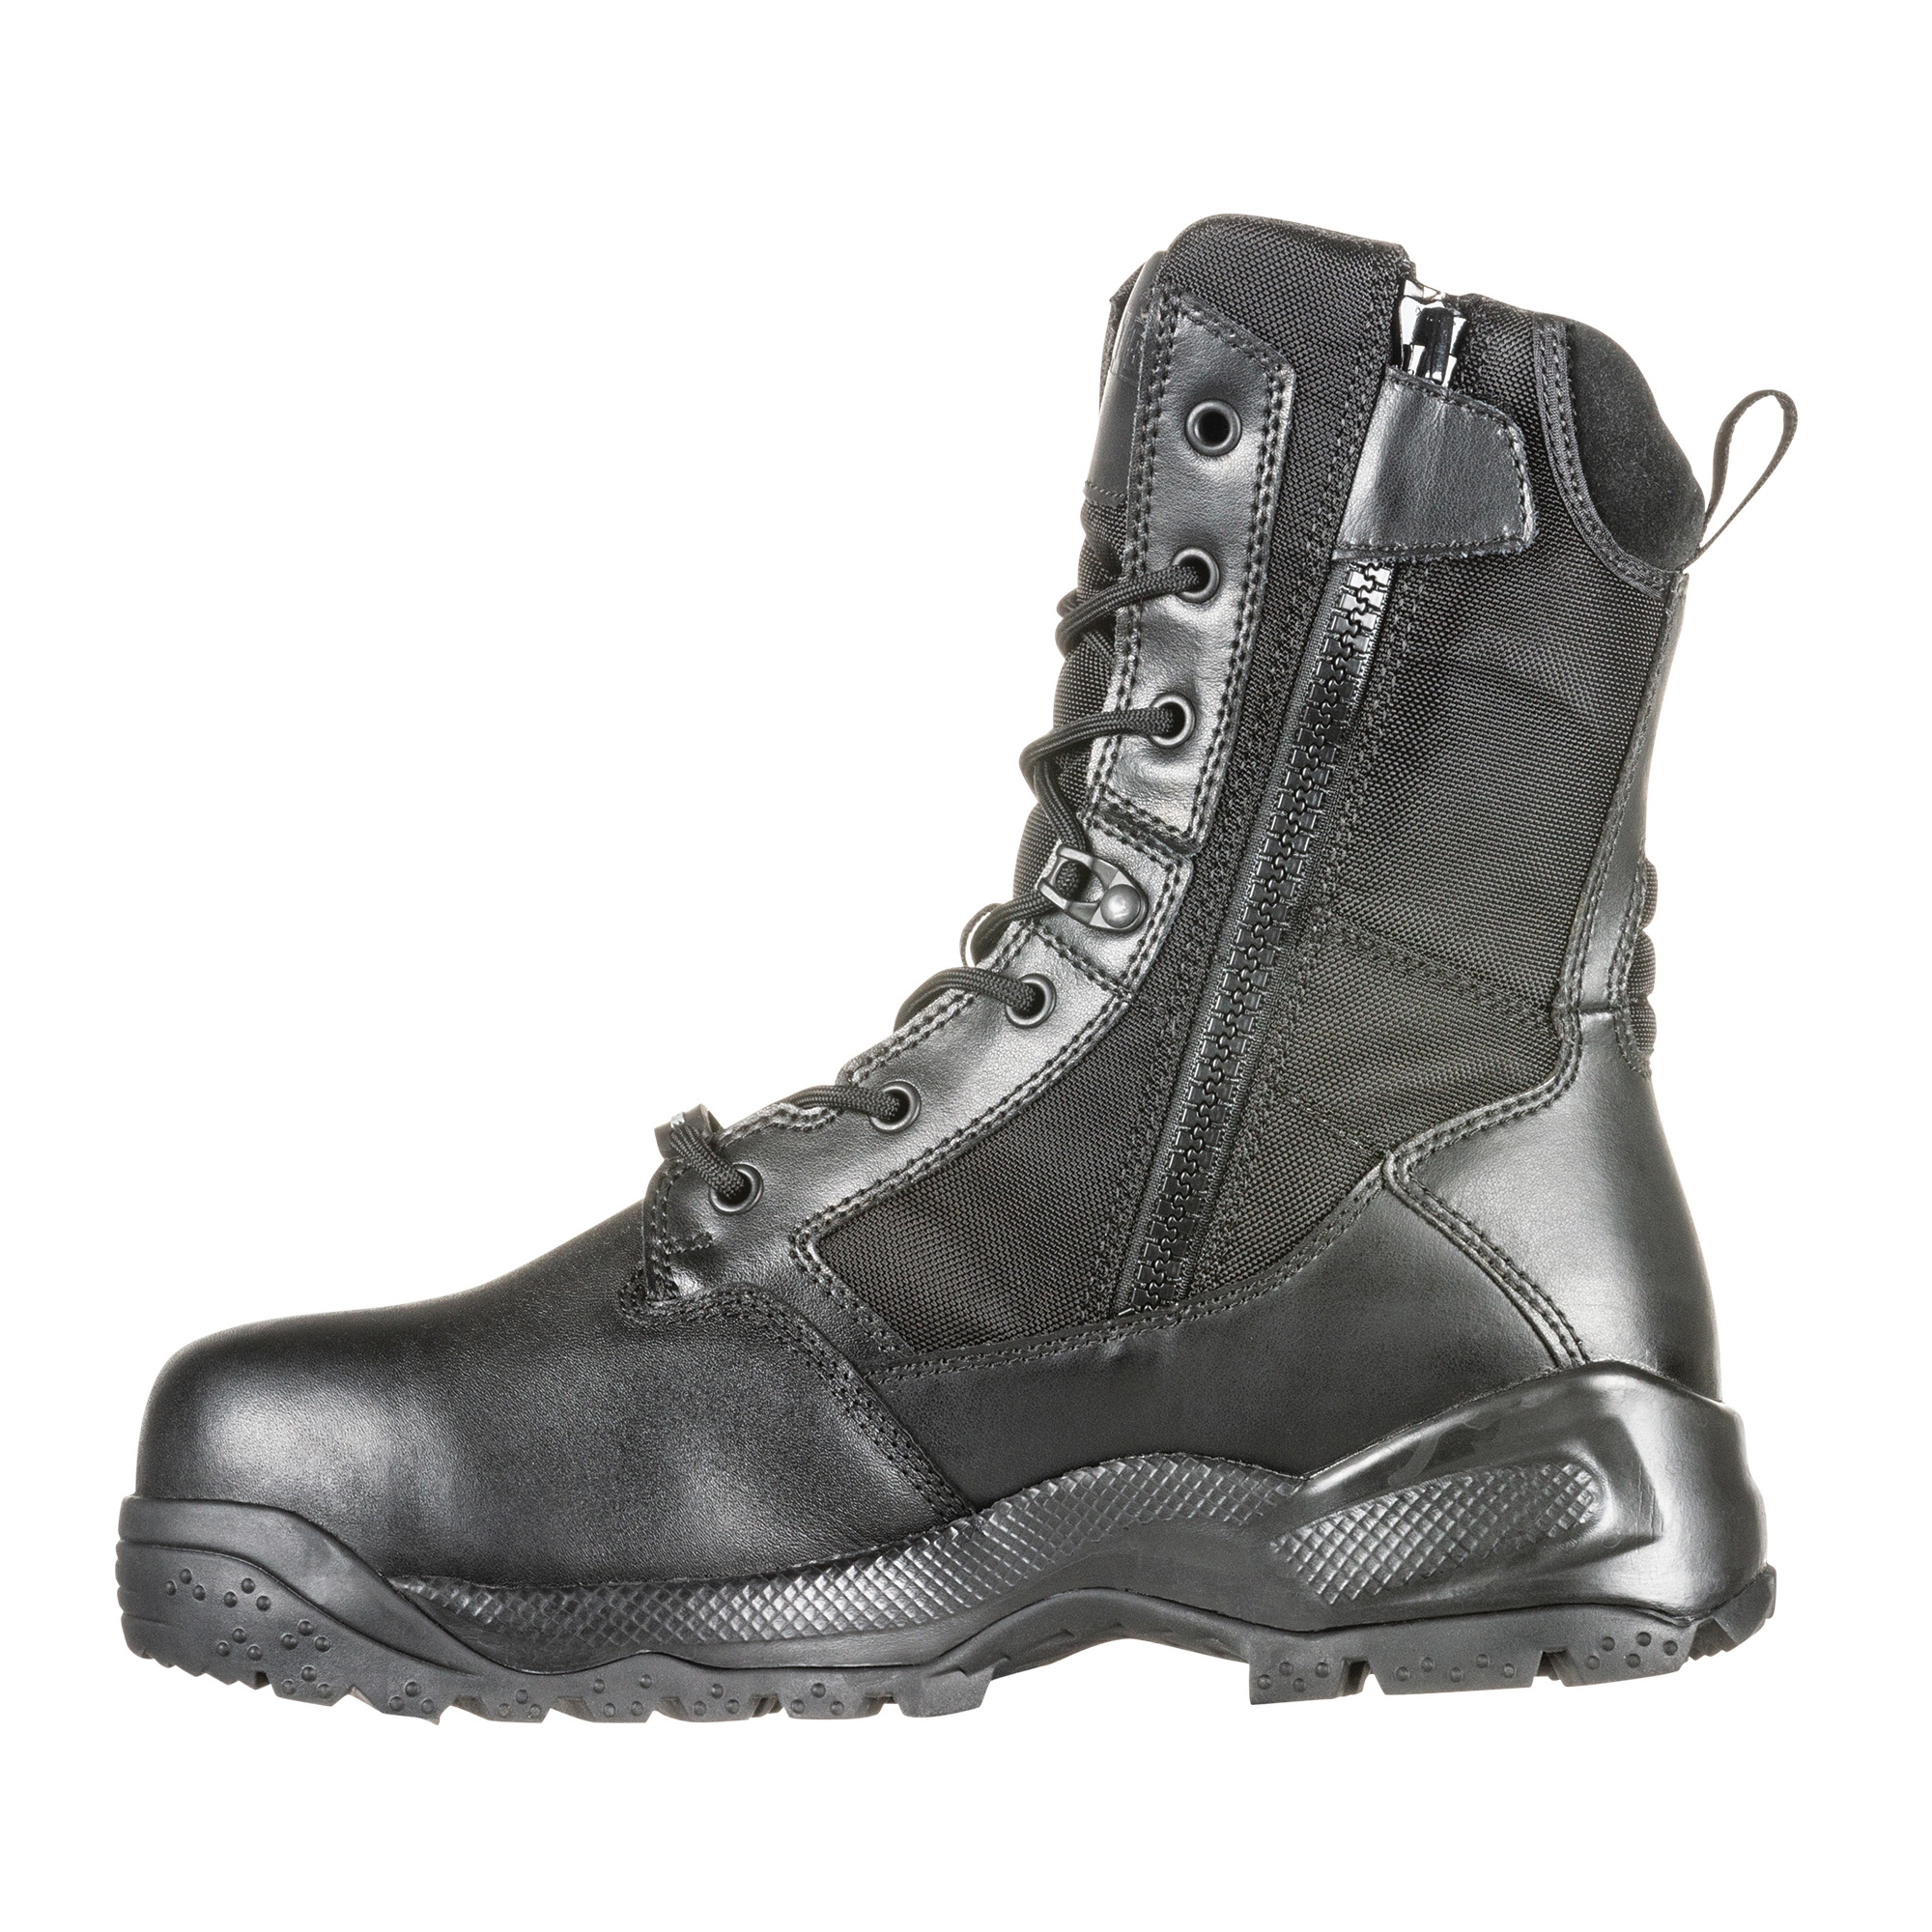 5.11 Tactical – A.T.A.C.® 2.0 8″ SHIELD BOOT – Prime Safety